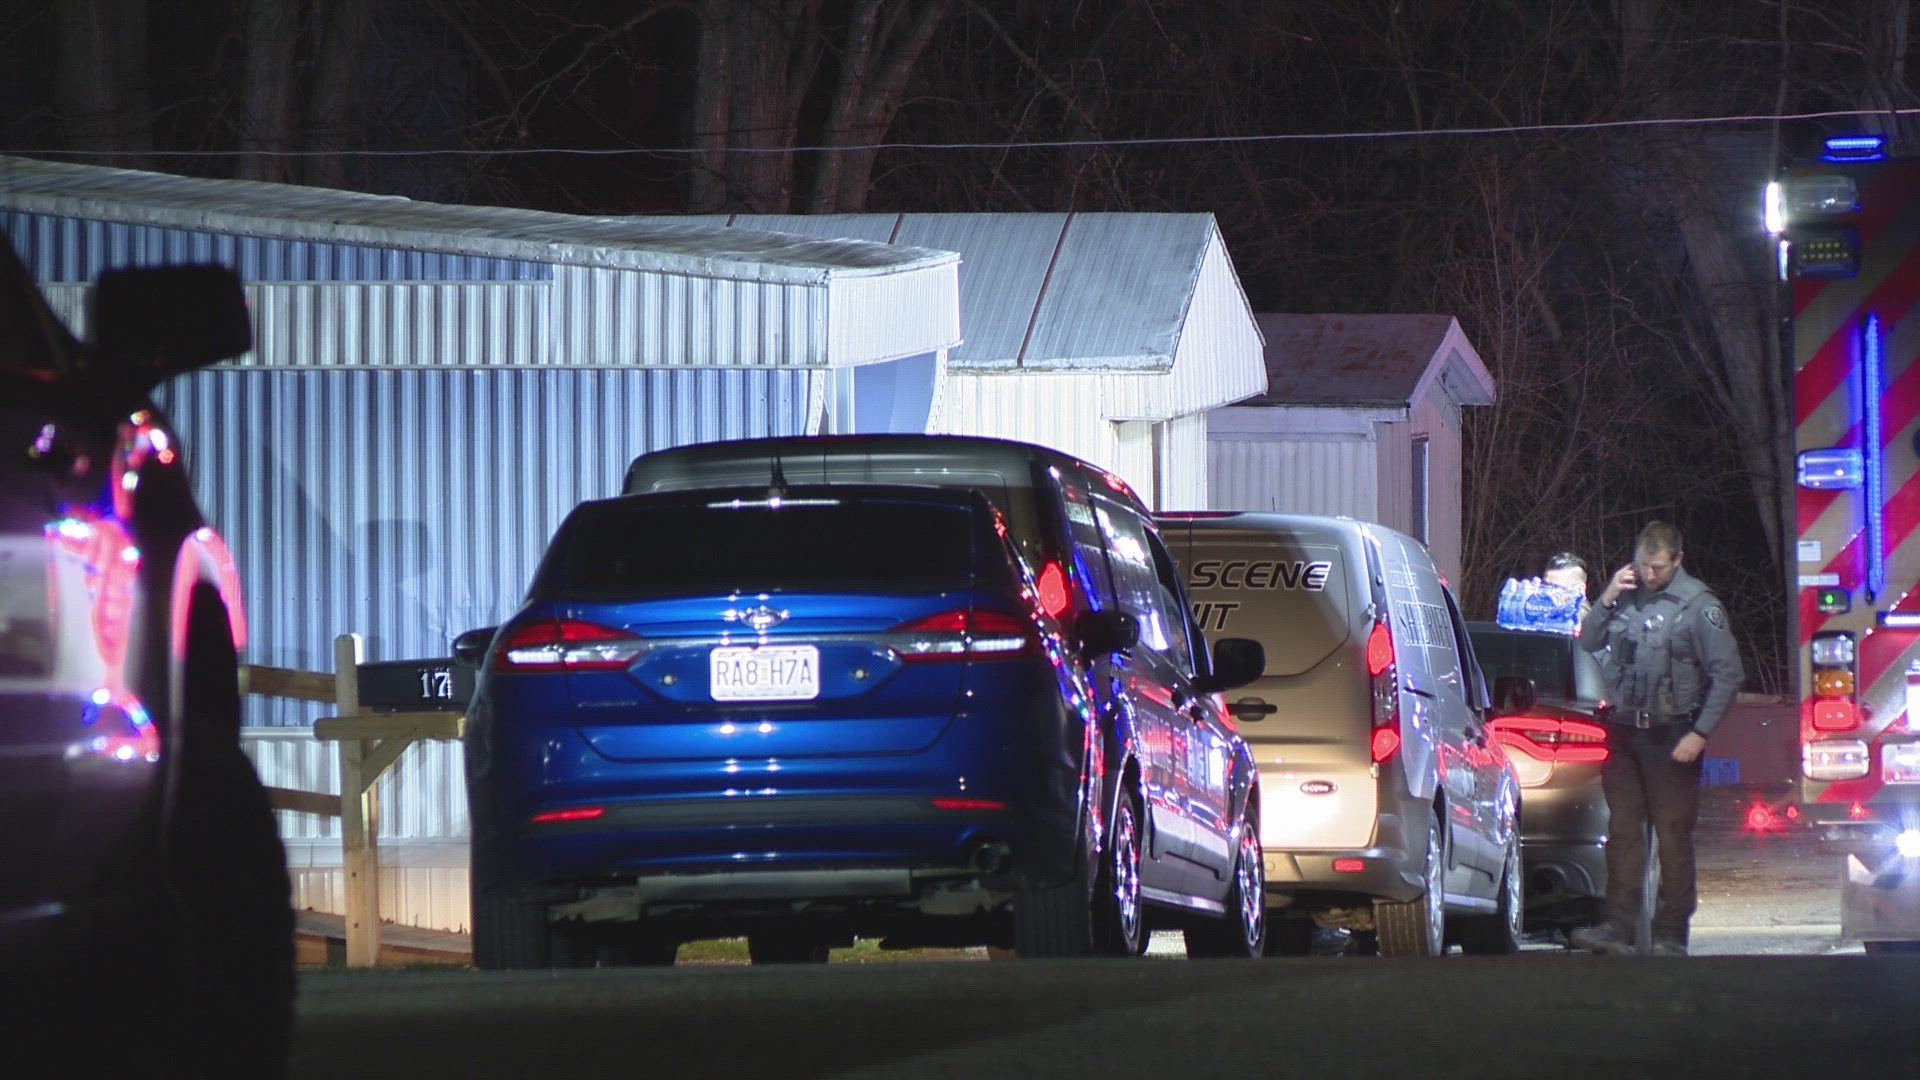 Police launched a homicide investigation Tuesday night after two people were found dead inside a Troy, Missouri, home.